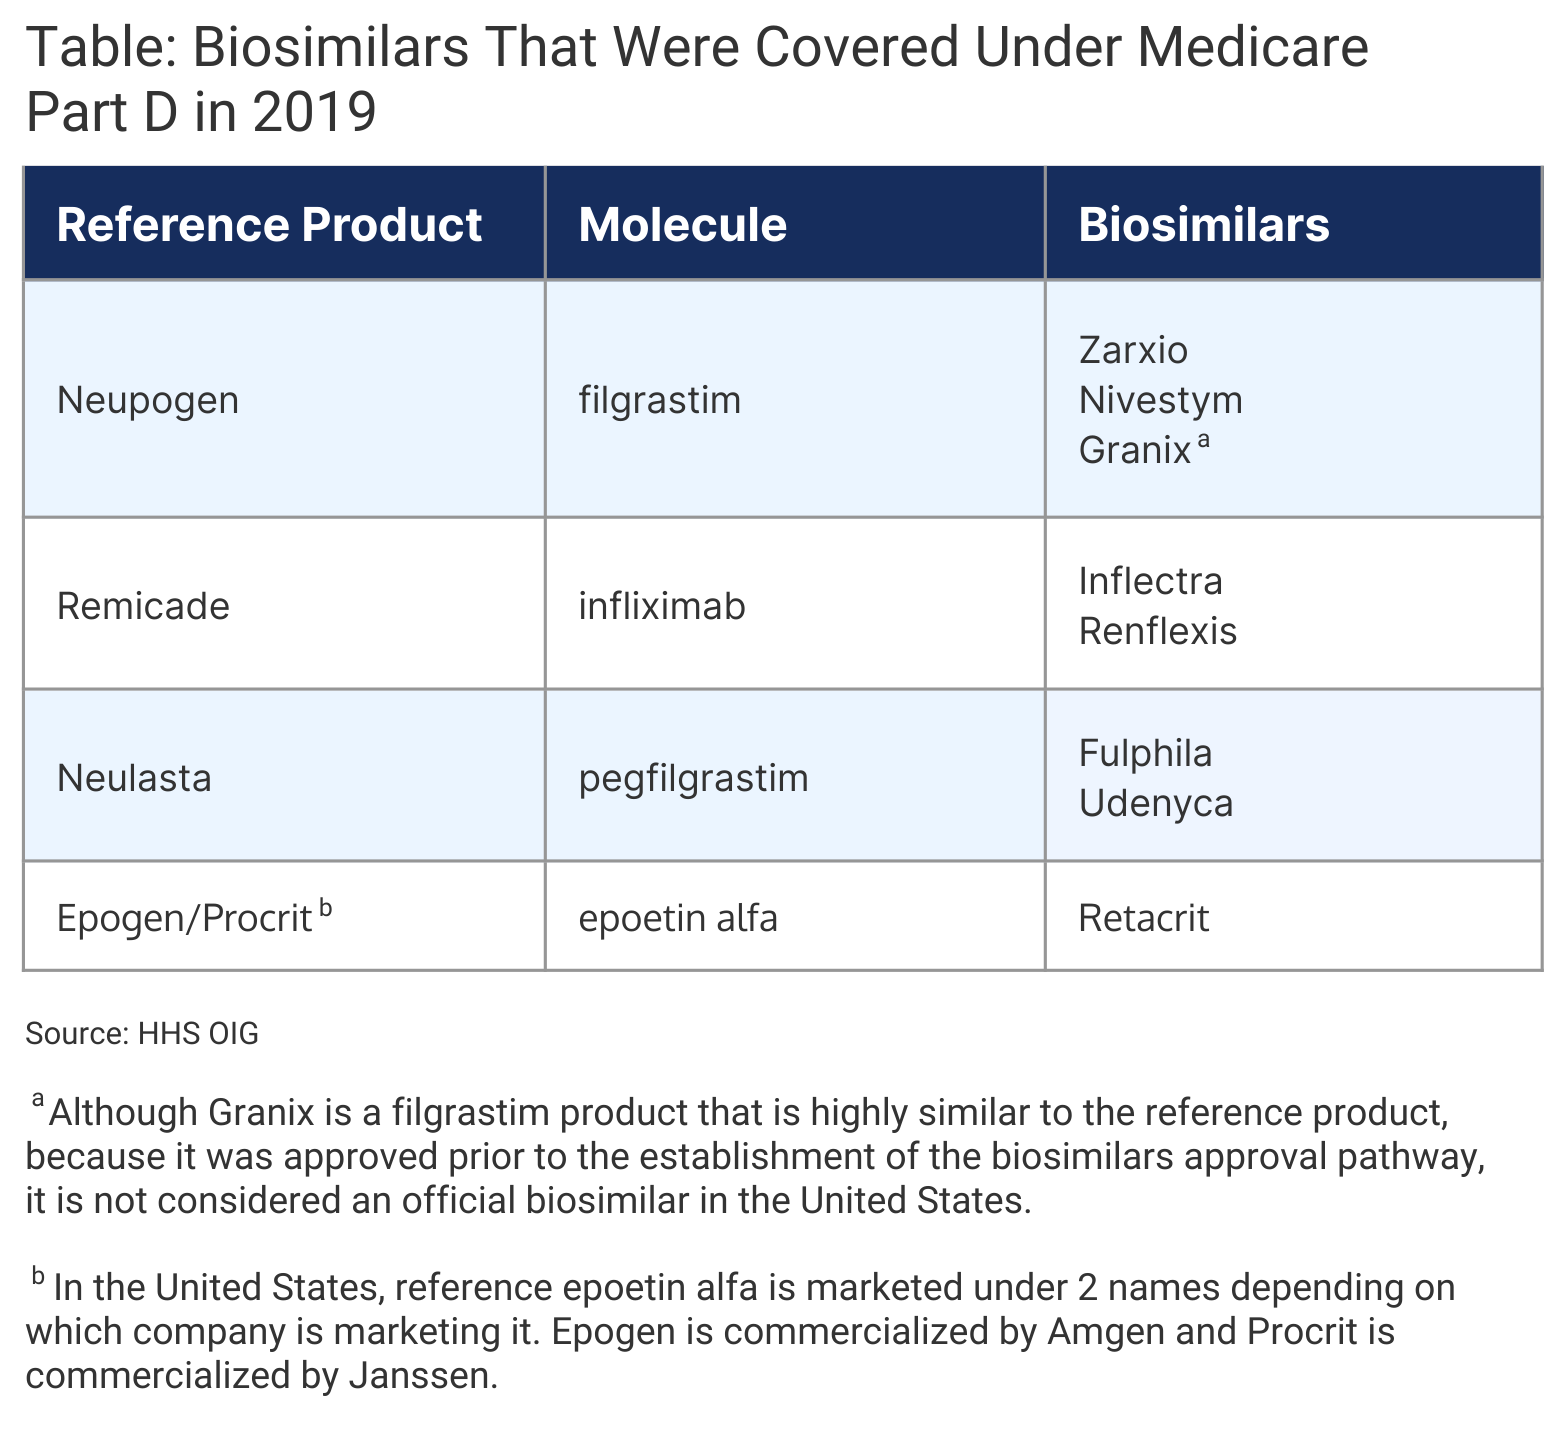 Table. Biosimilars that were covered under Medicare Part D in 2019